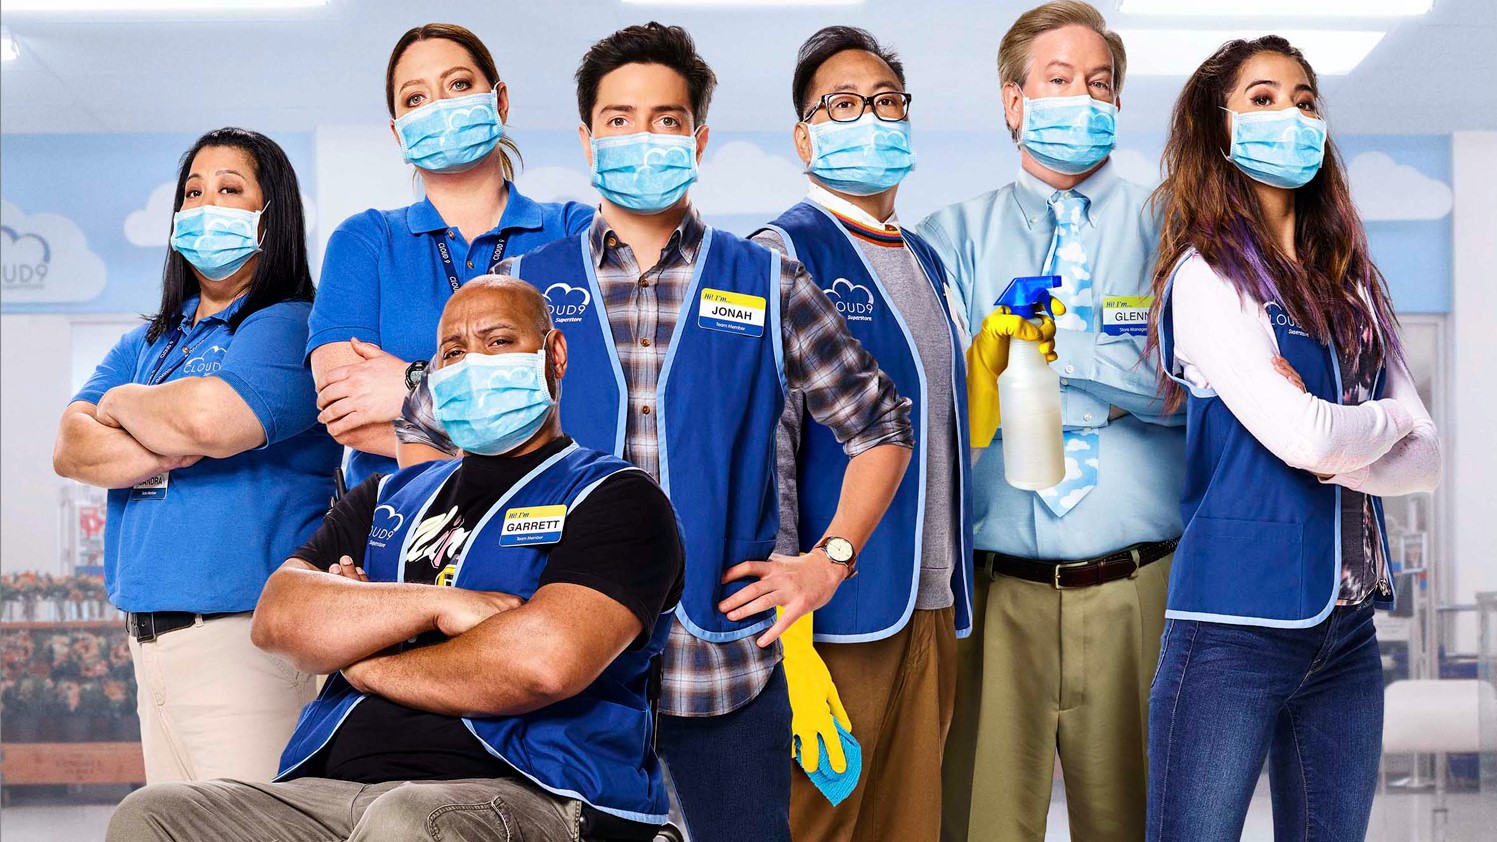 Superstore: How the Finale Ended with a Similar Conclusion to The Office